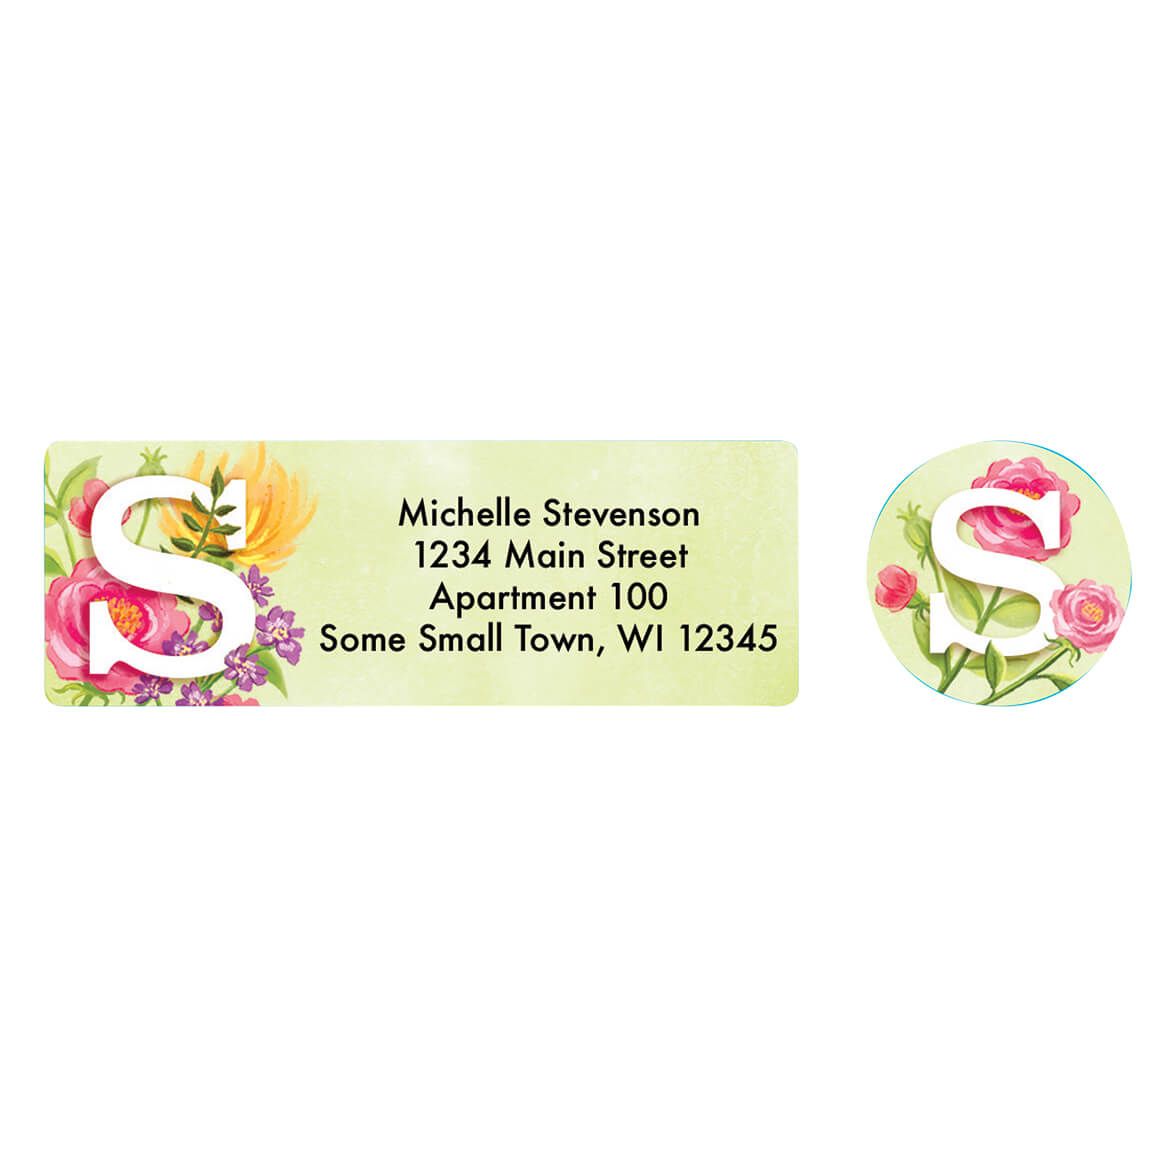 Personalized Floral Initial Address Labels & Envelope Seals Set of 60 + '-' + 368837